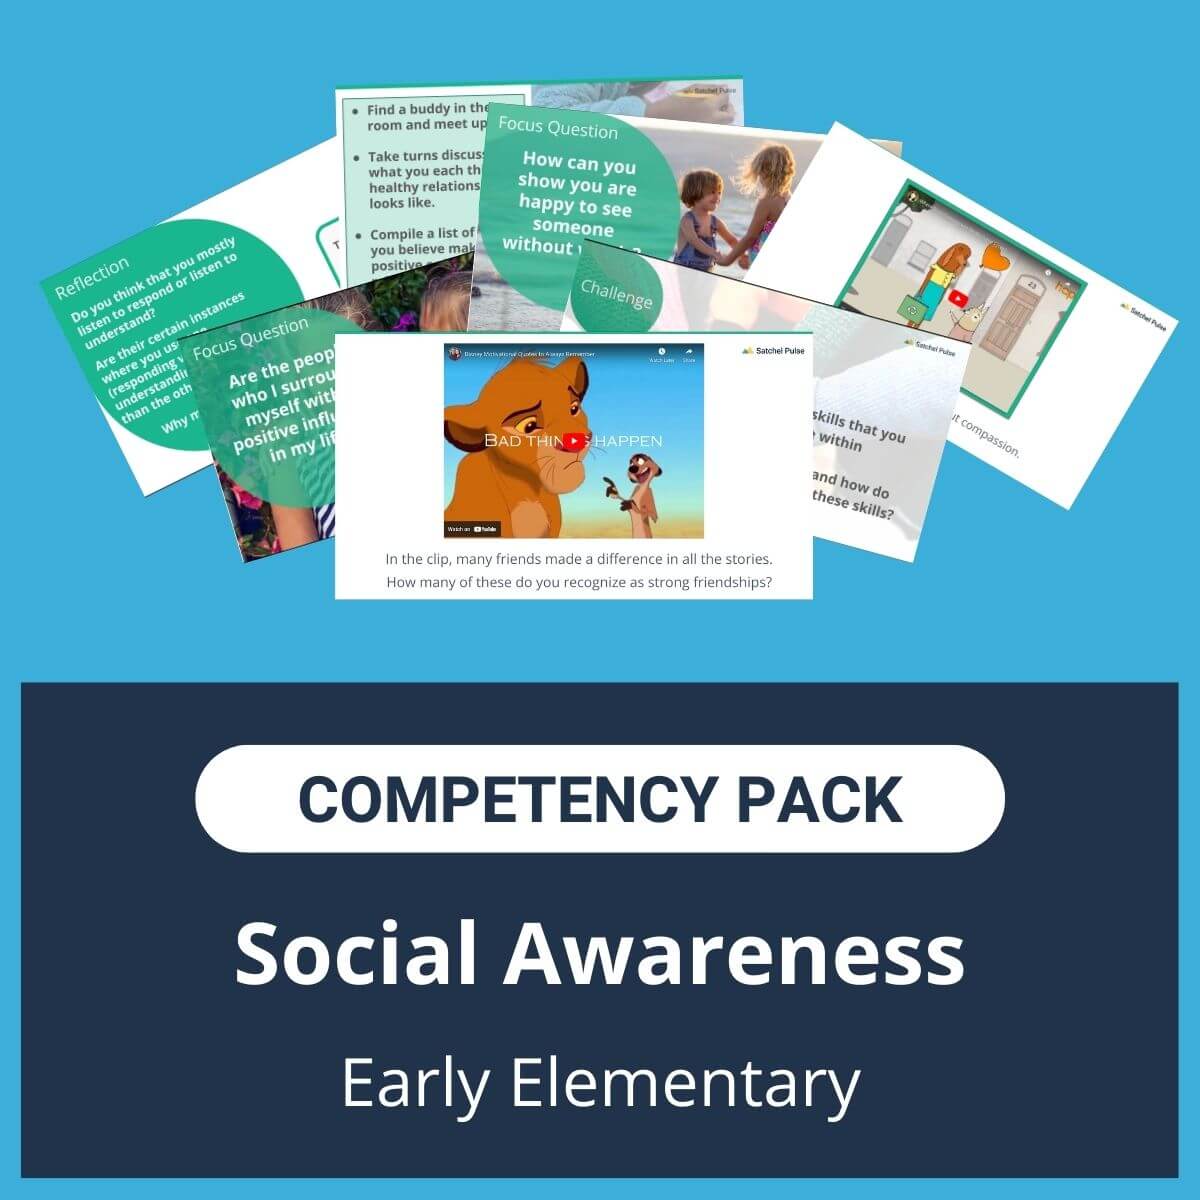 This SEL Resource pack for "Social Awareness" competency includes a range of SEL activities such as SEL lessons and self-studies